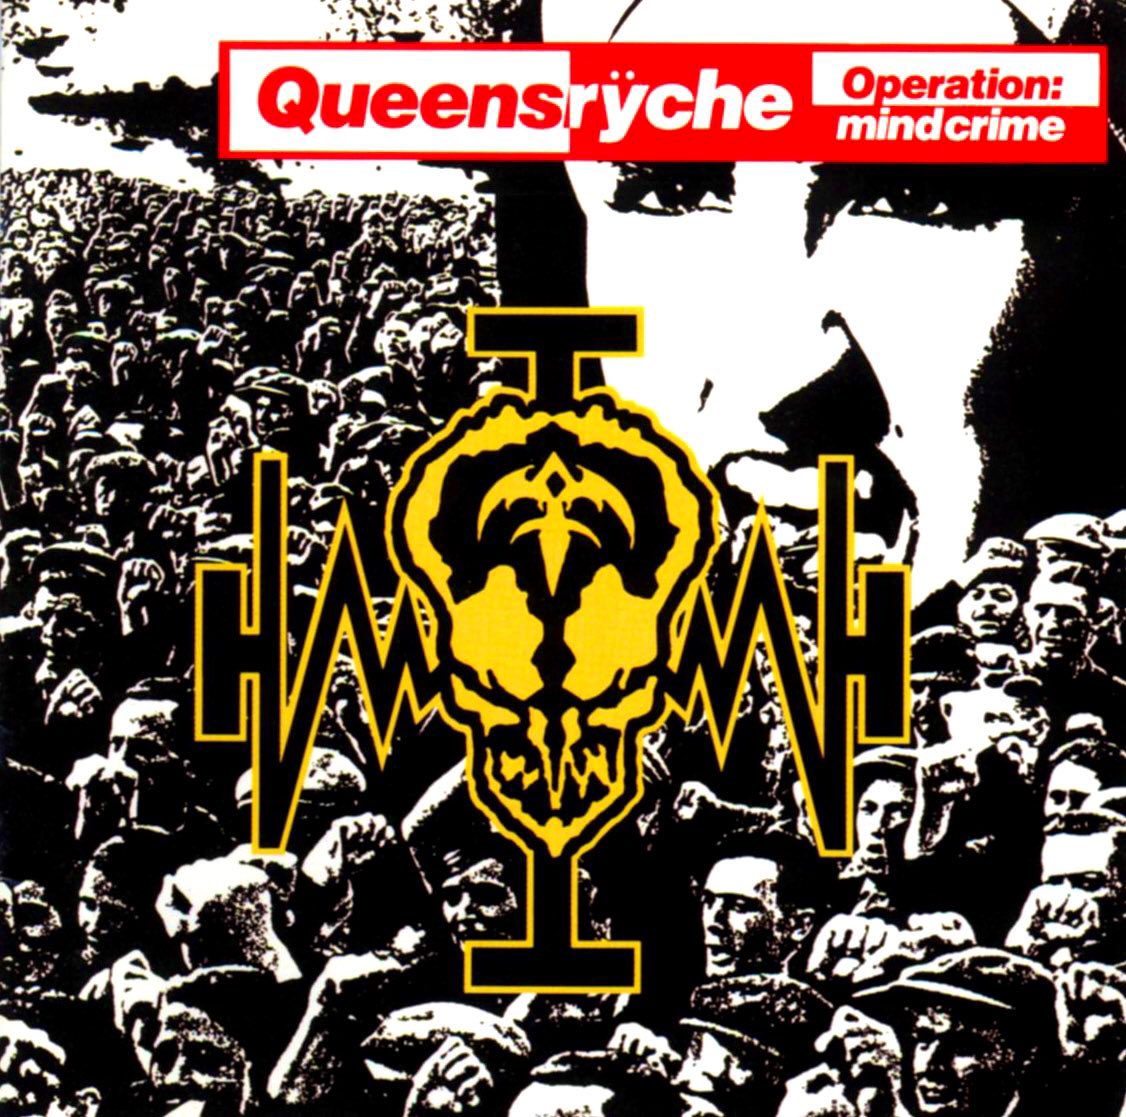 @RnRNationlive @RnRliveRadio @queensryche Operation Mindcrime 
No need to overthink this.